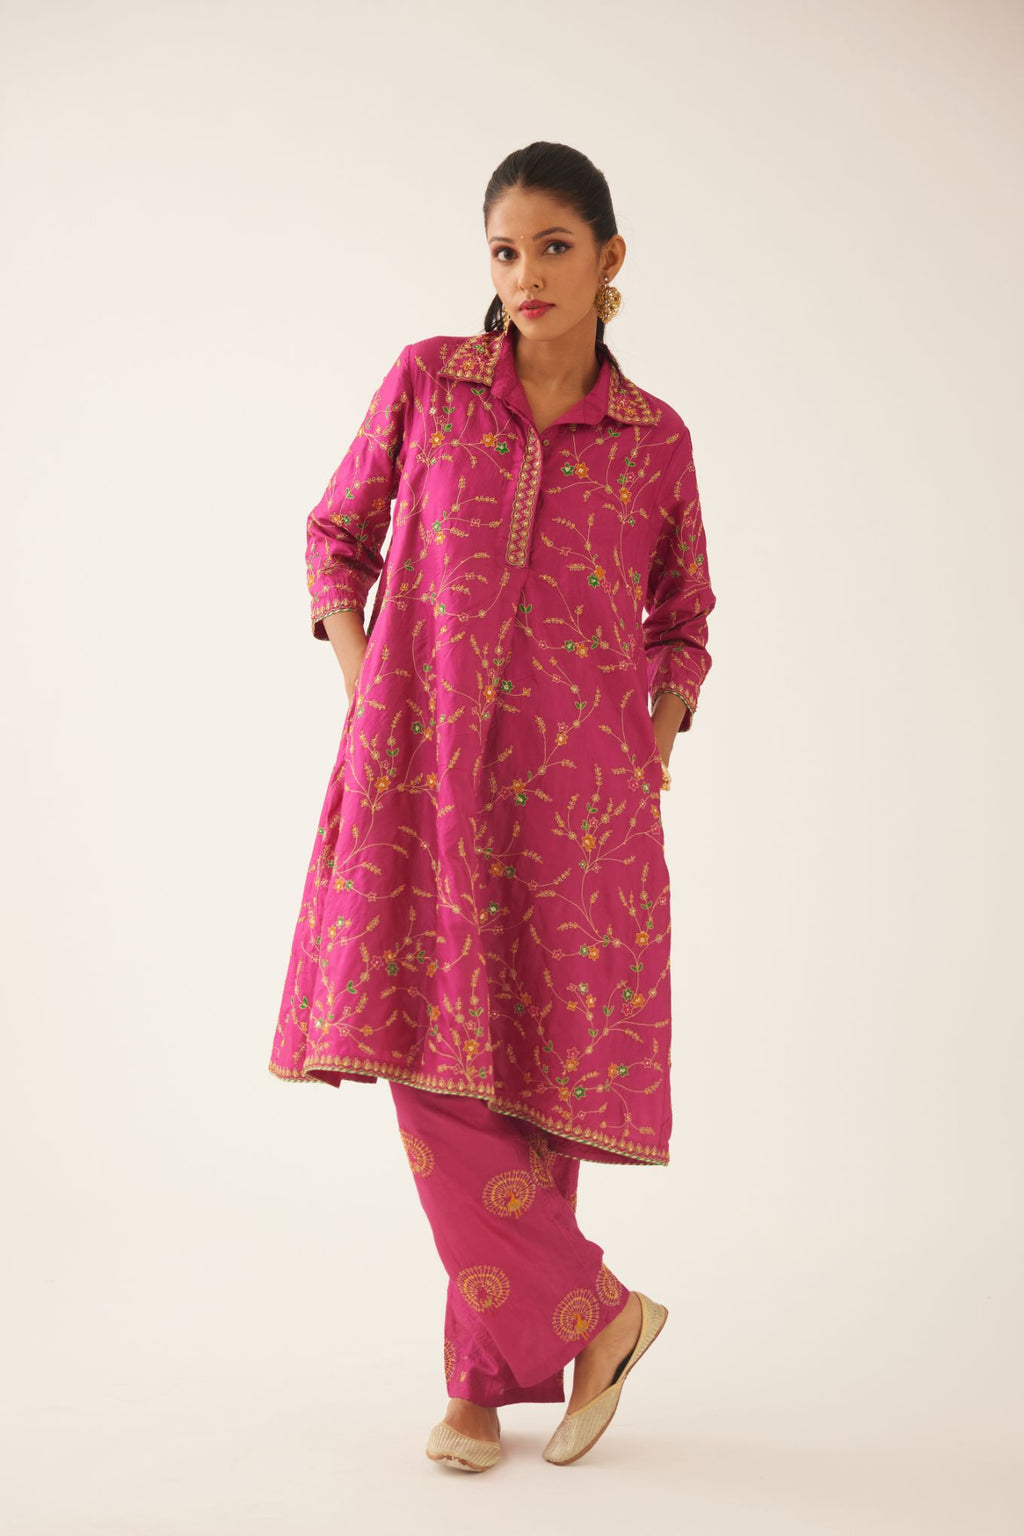 Jazz berry A-line short silk kurta set with all over embroidery, highlighted with sequins and bead work, paired with Jaz berry silk straight pants with dori and silk thread embroidery.